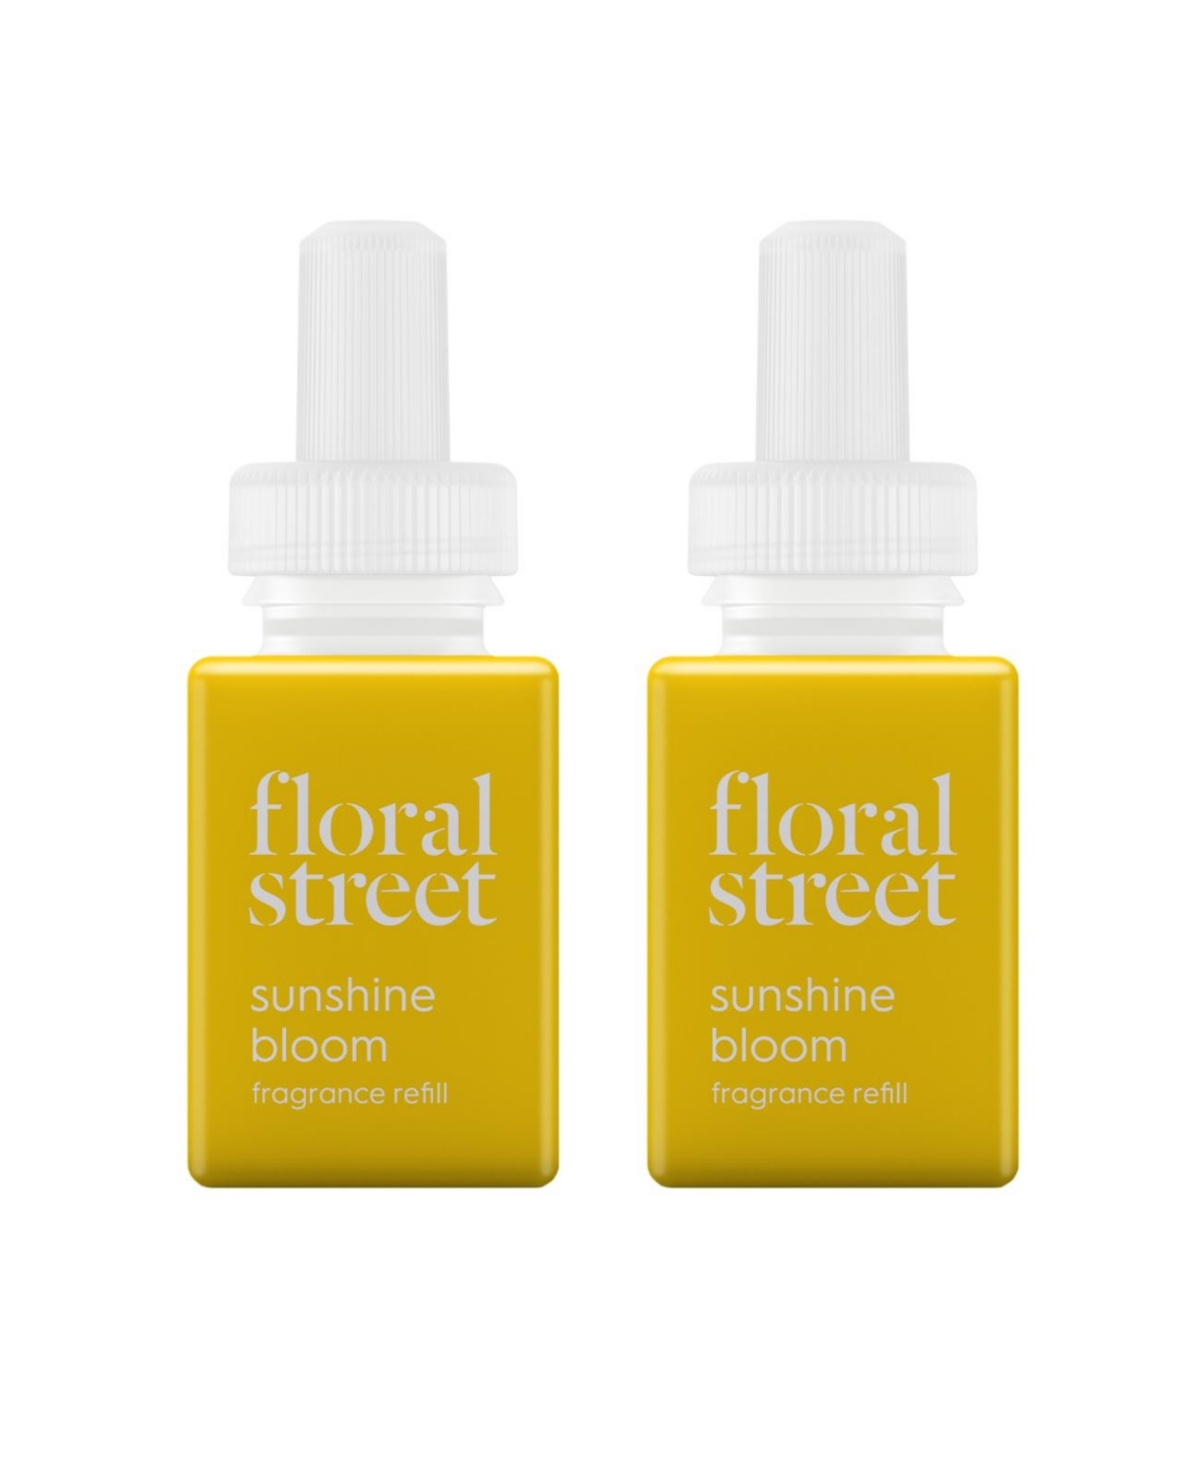 and Floral Street - Sunshine Bloom - Fragrance for Smart Home Air Diffusers - Room Freshener - Aromatherapy Scents for Bedrooms & Living Rooms -